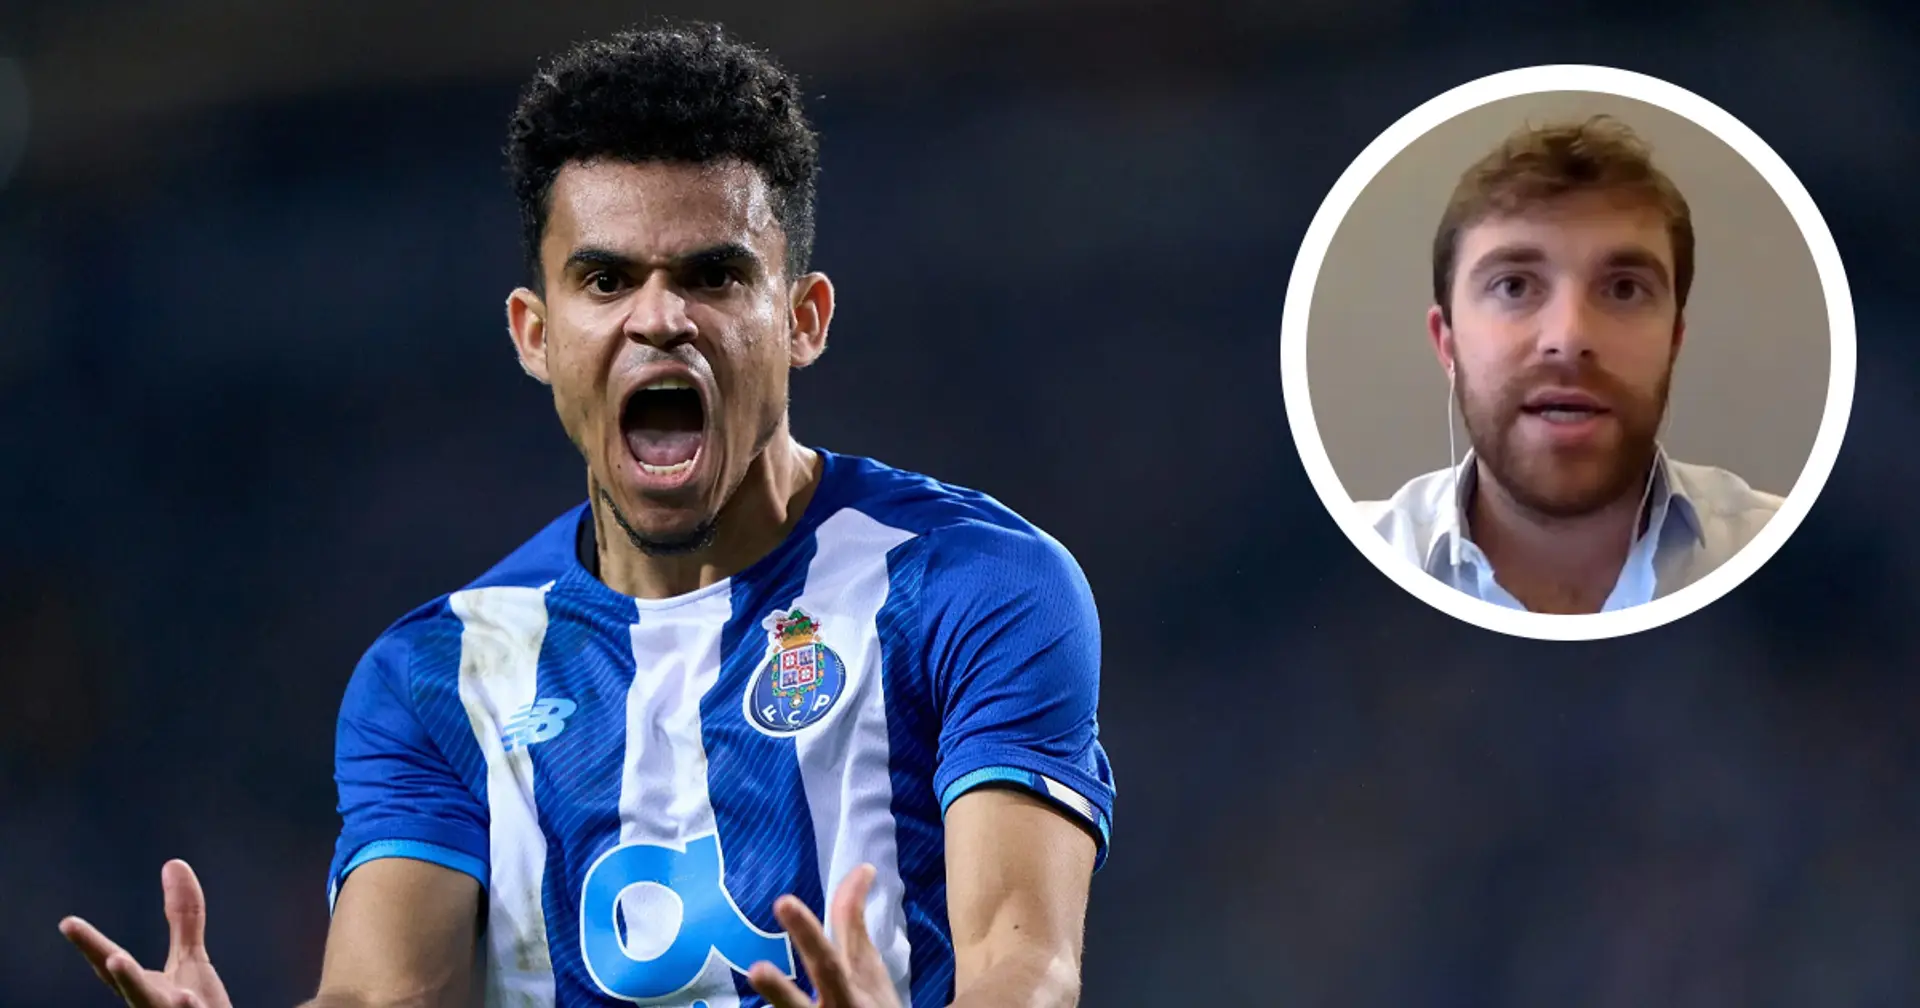 Liverpool scouted Luis Diaz 5 times last year, transfer not on agenda in January - Fabrizio Romano